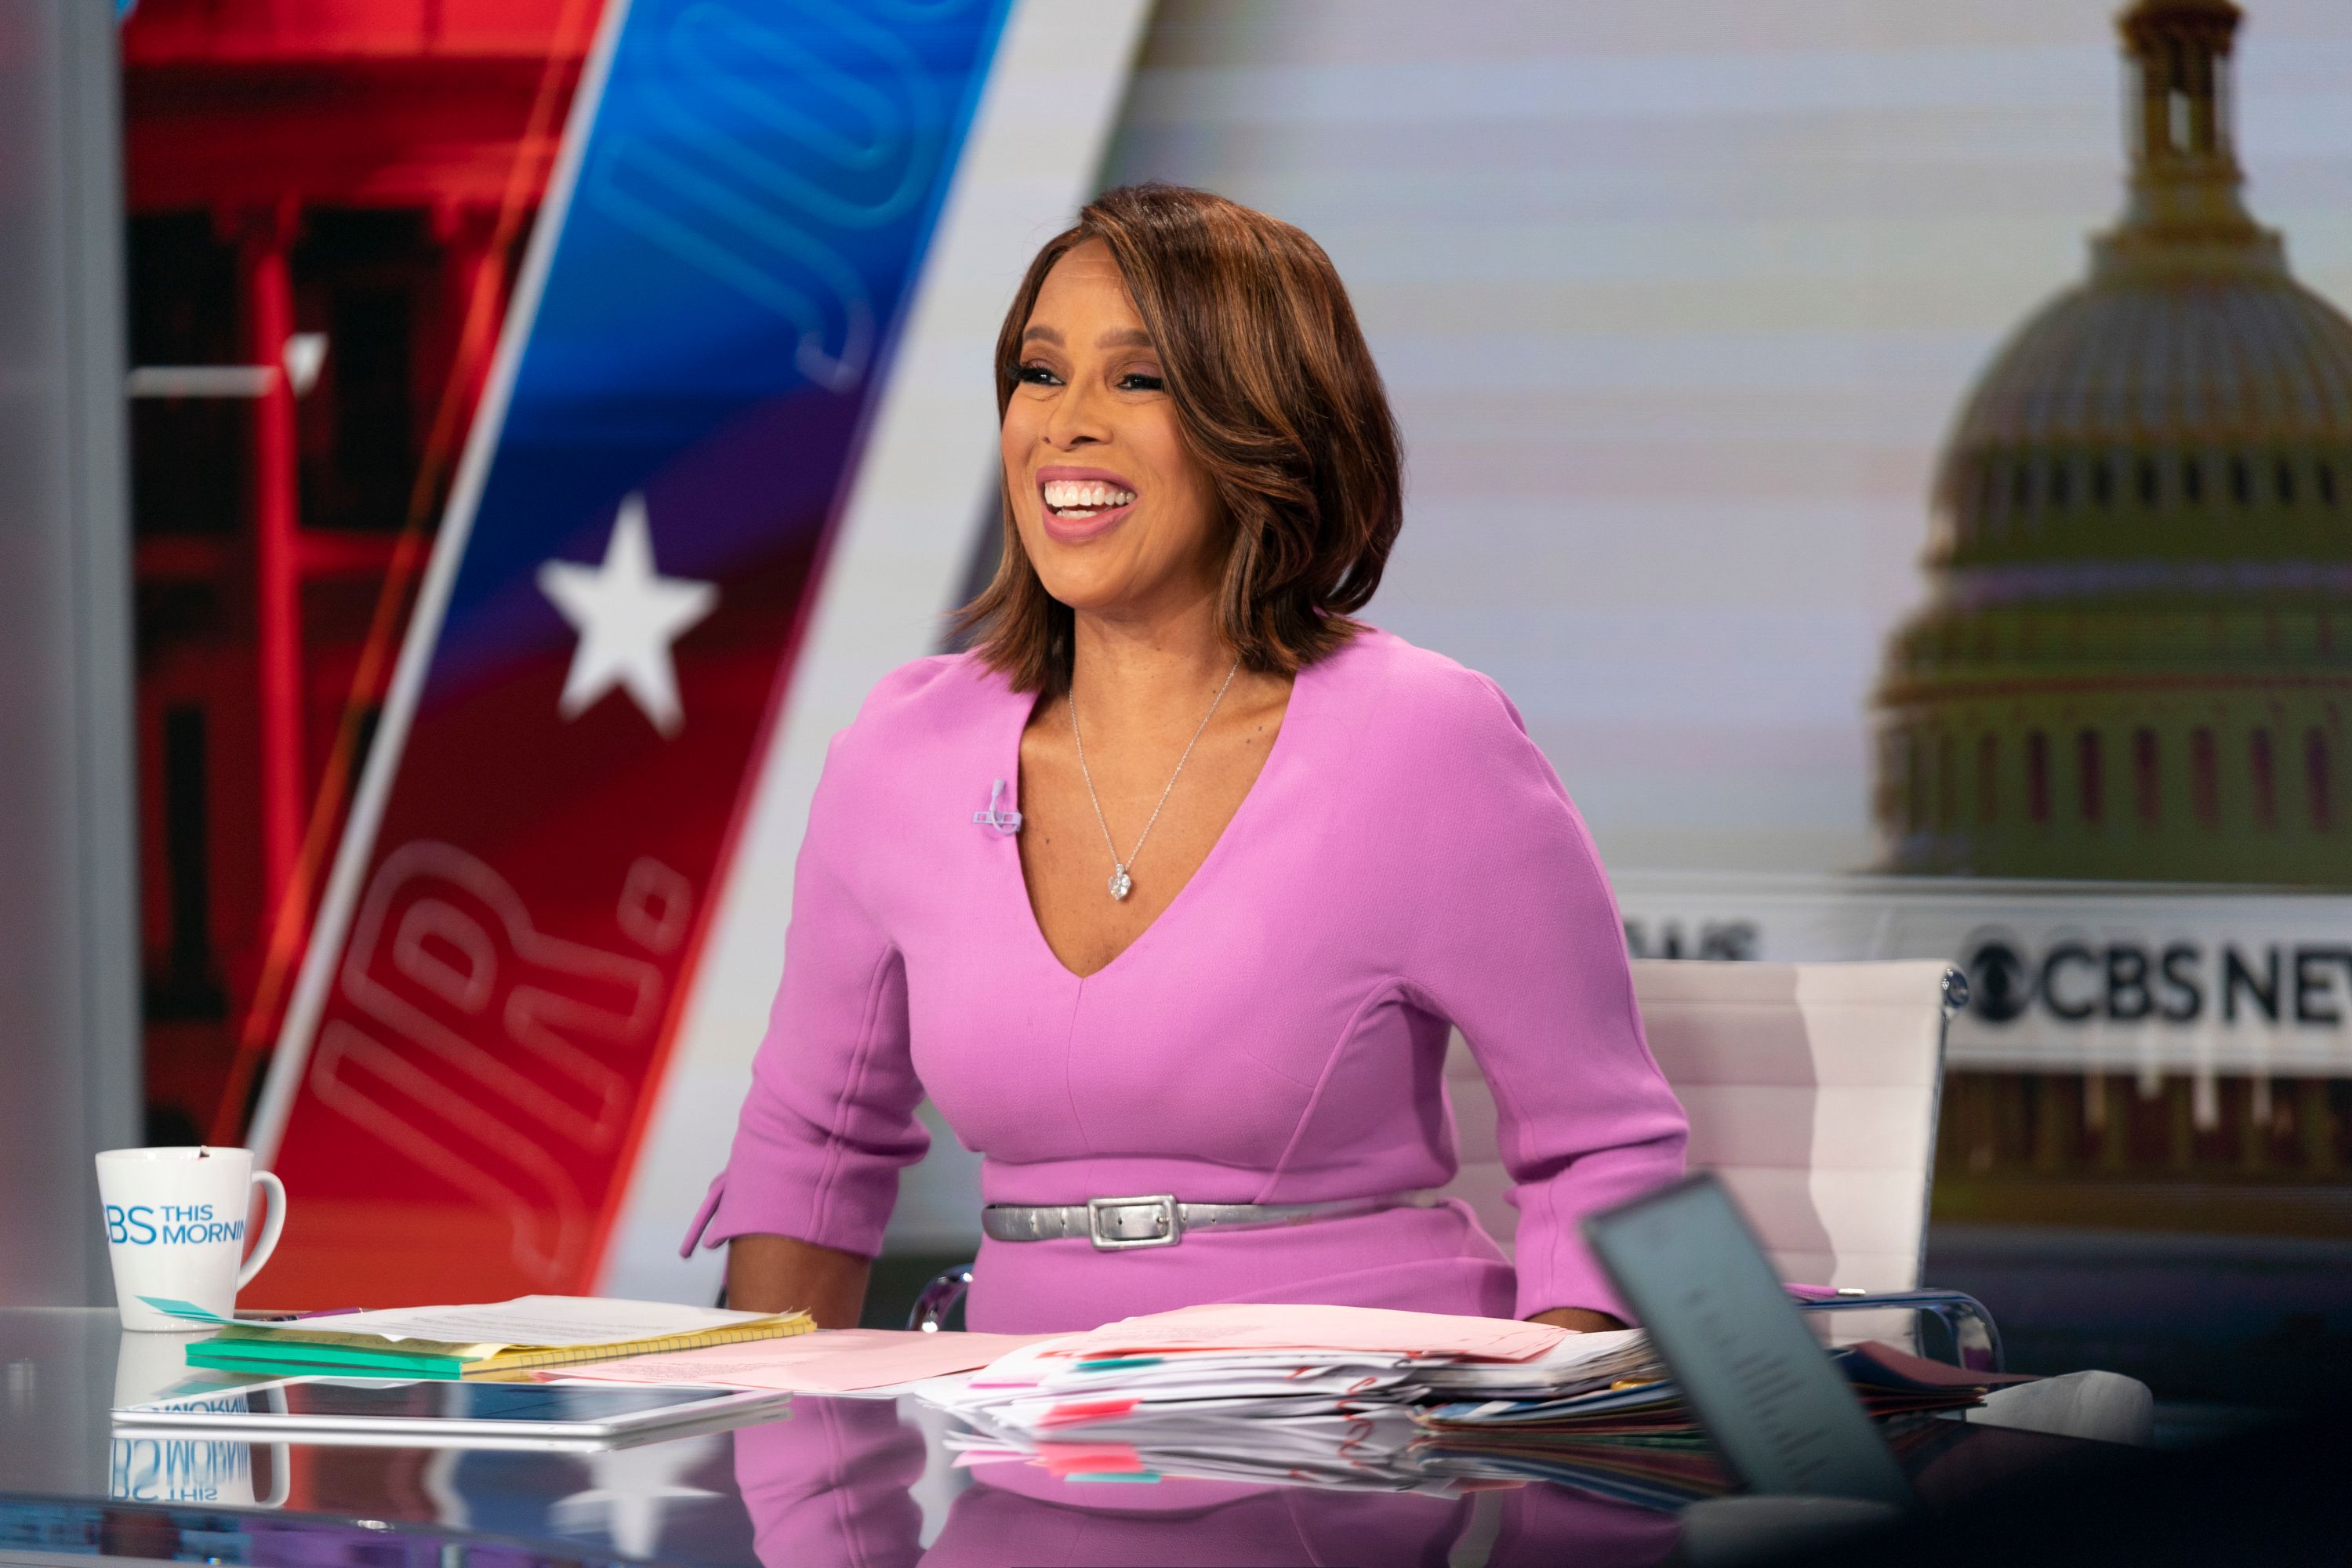 Gayle King broadcasts live from Washington DC on Inauguration Day 2021 | Photo: Getty Images